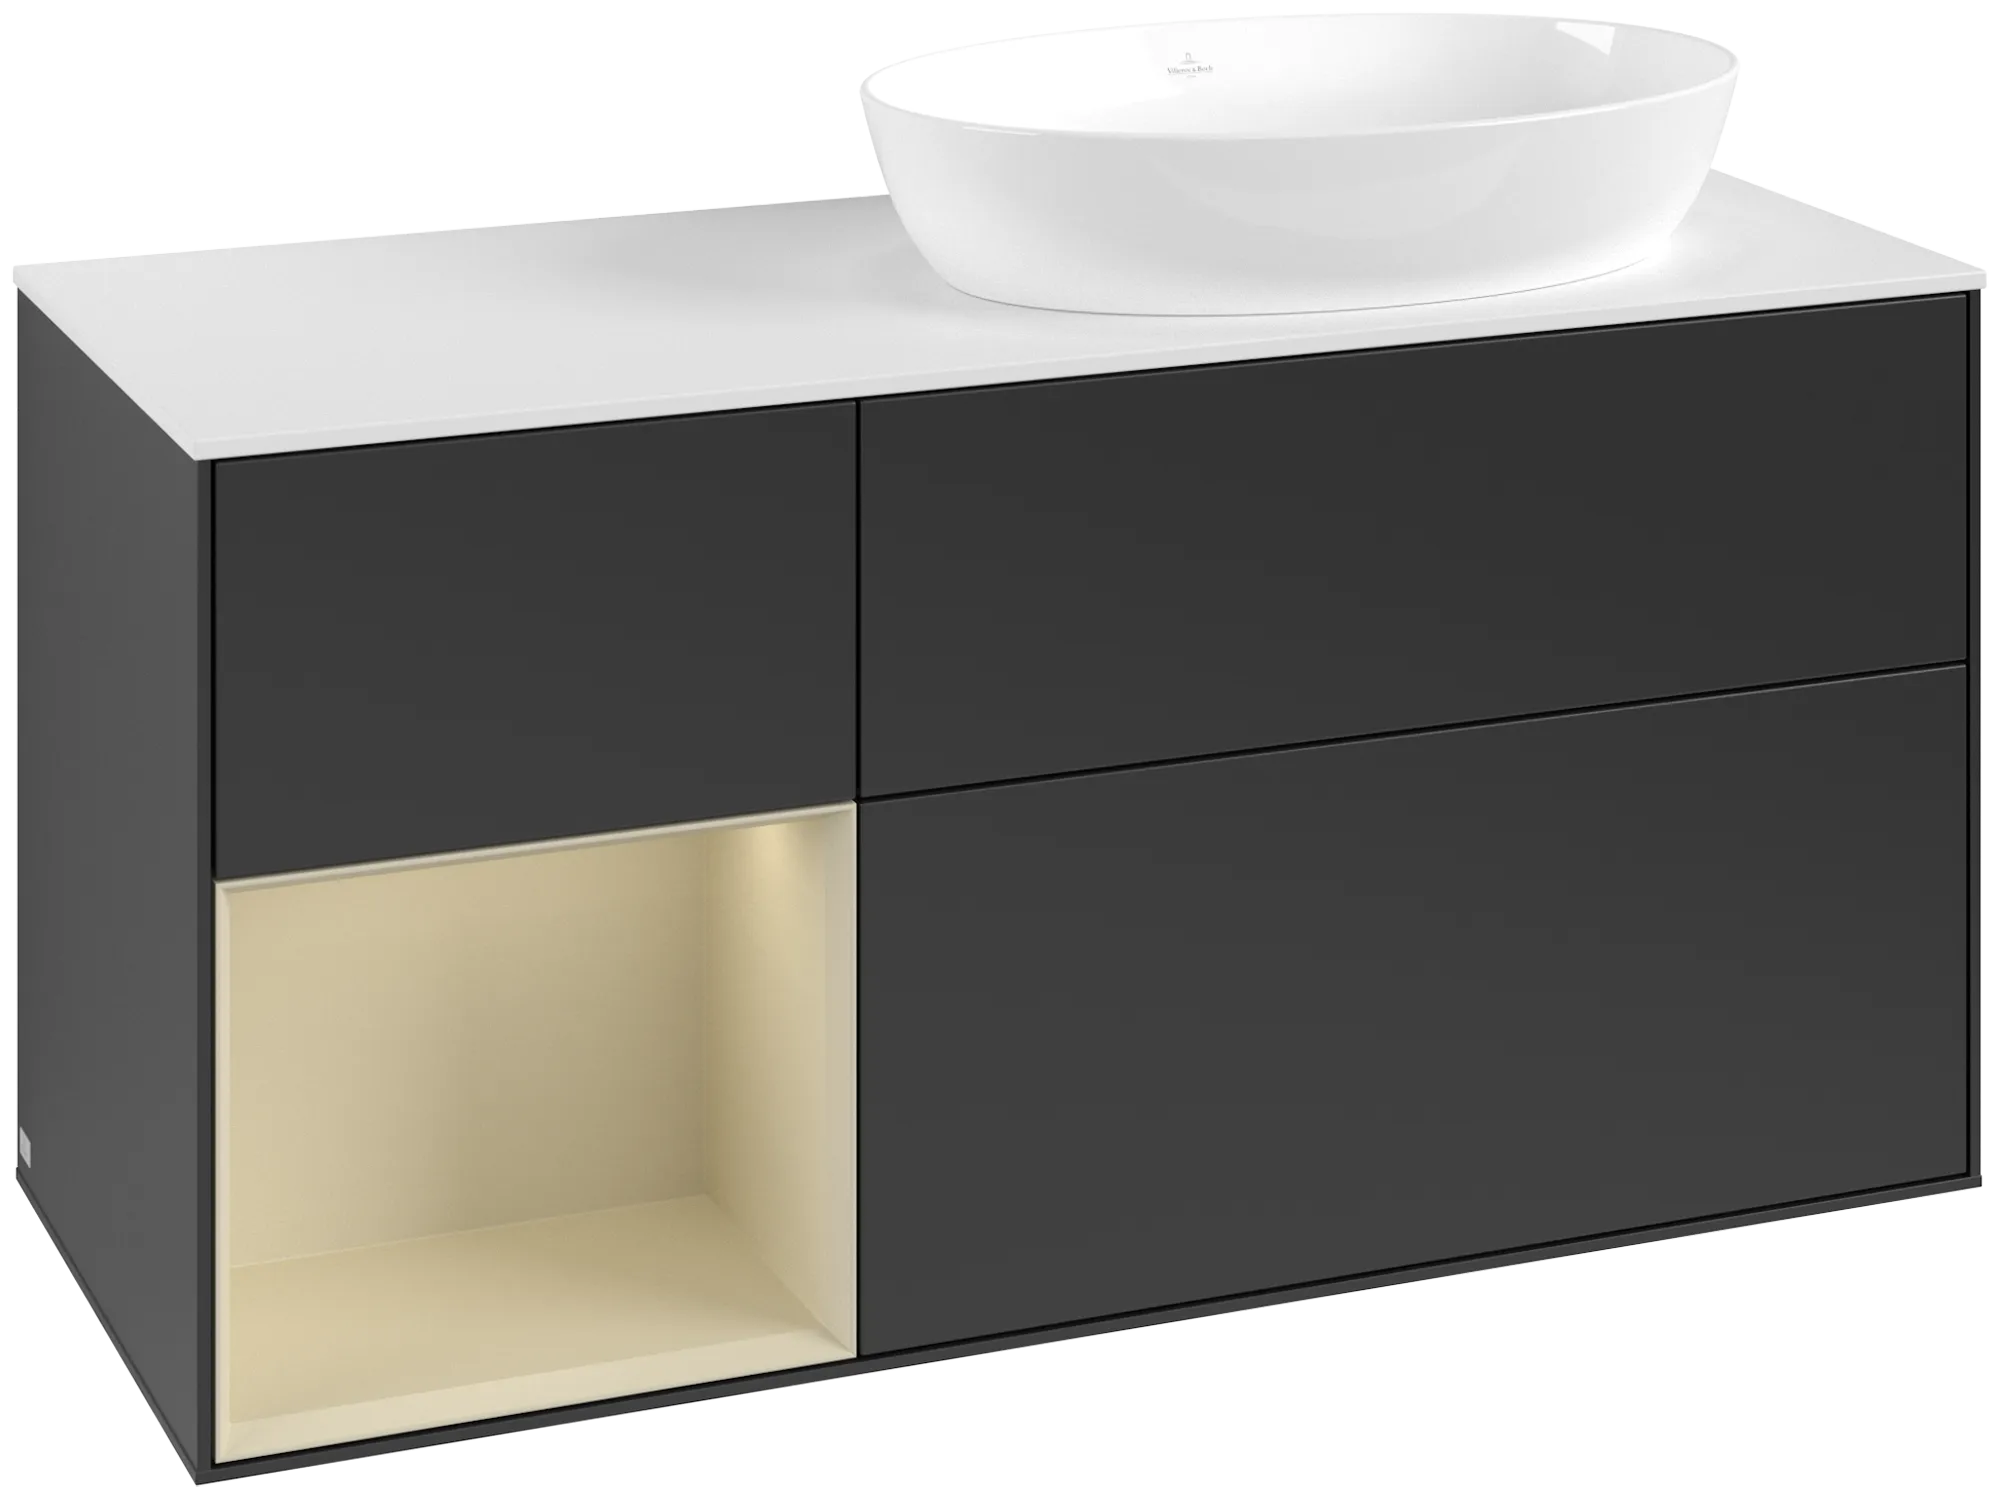 Picture of VILLEROY BOCH Finion Vanity unit, with lighting, 3 pull-out compartments, 1200 x 603 x 501 mm, Black Matt Lacquer / Silk Grey Matt Lacquer / Glass White Matt #GA41HJPD